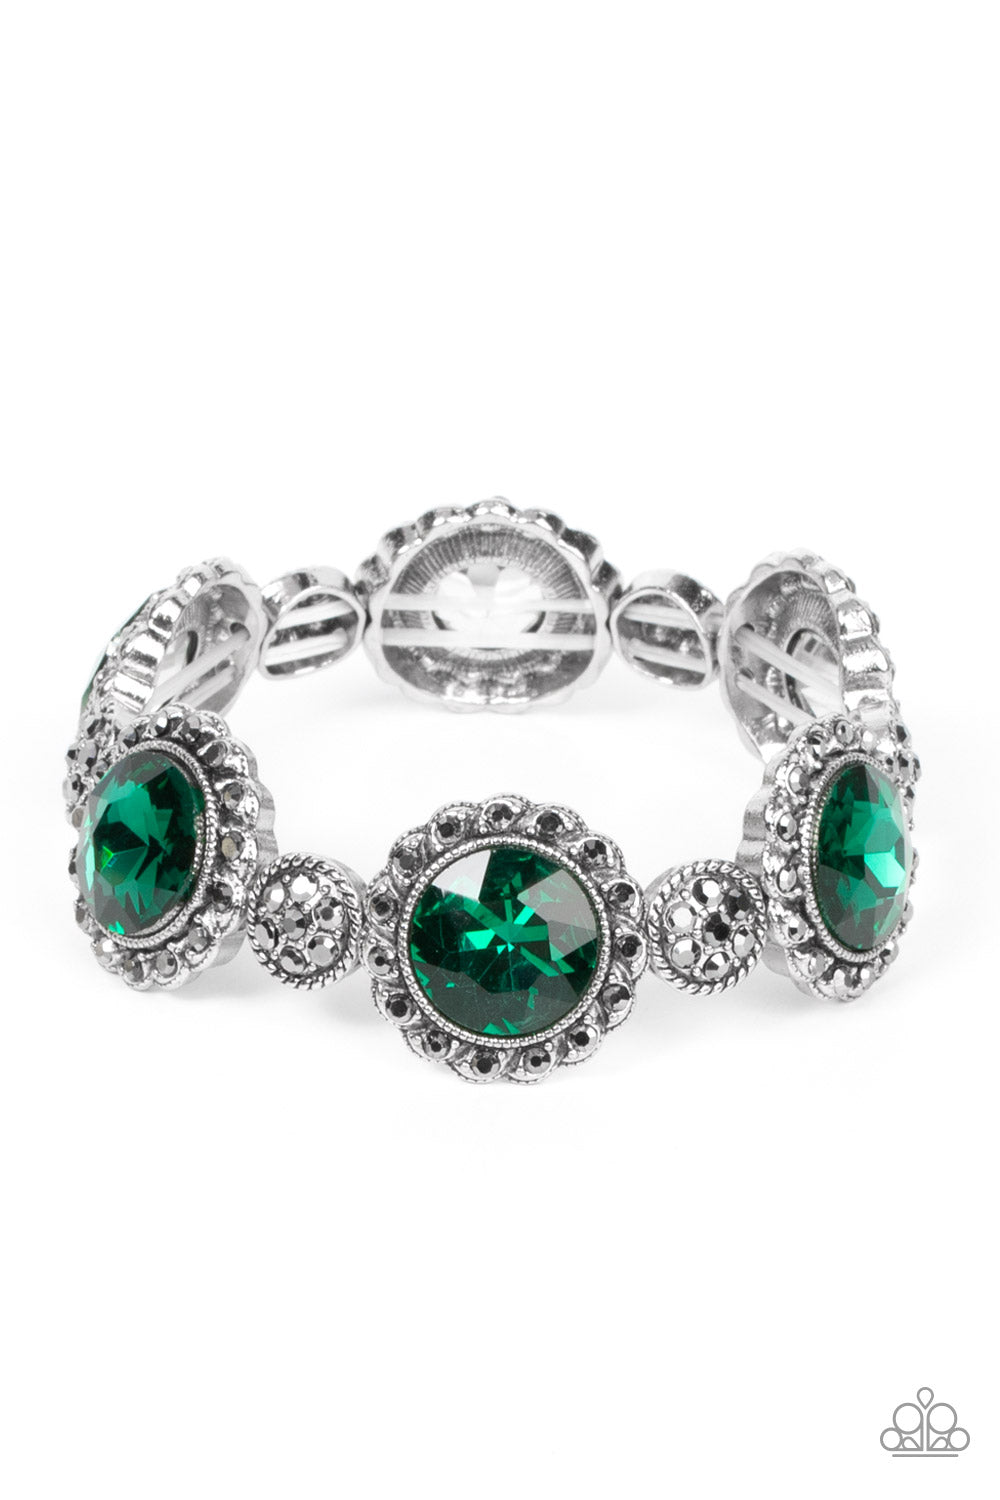 Palace Property - Green and Silver Bracelet  - Paparazzi Accessories - An oversized green rhinestone adorns the center of a hematite rhinestone petaled floral frame. Infused with hematite dotted silver accents, the glitzy floral frames sparkle along stretchy bands around the wrist for a glamorous finish.  Bejeweled Accessories By Kristie - Trendy fashion jewelry for everyone -